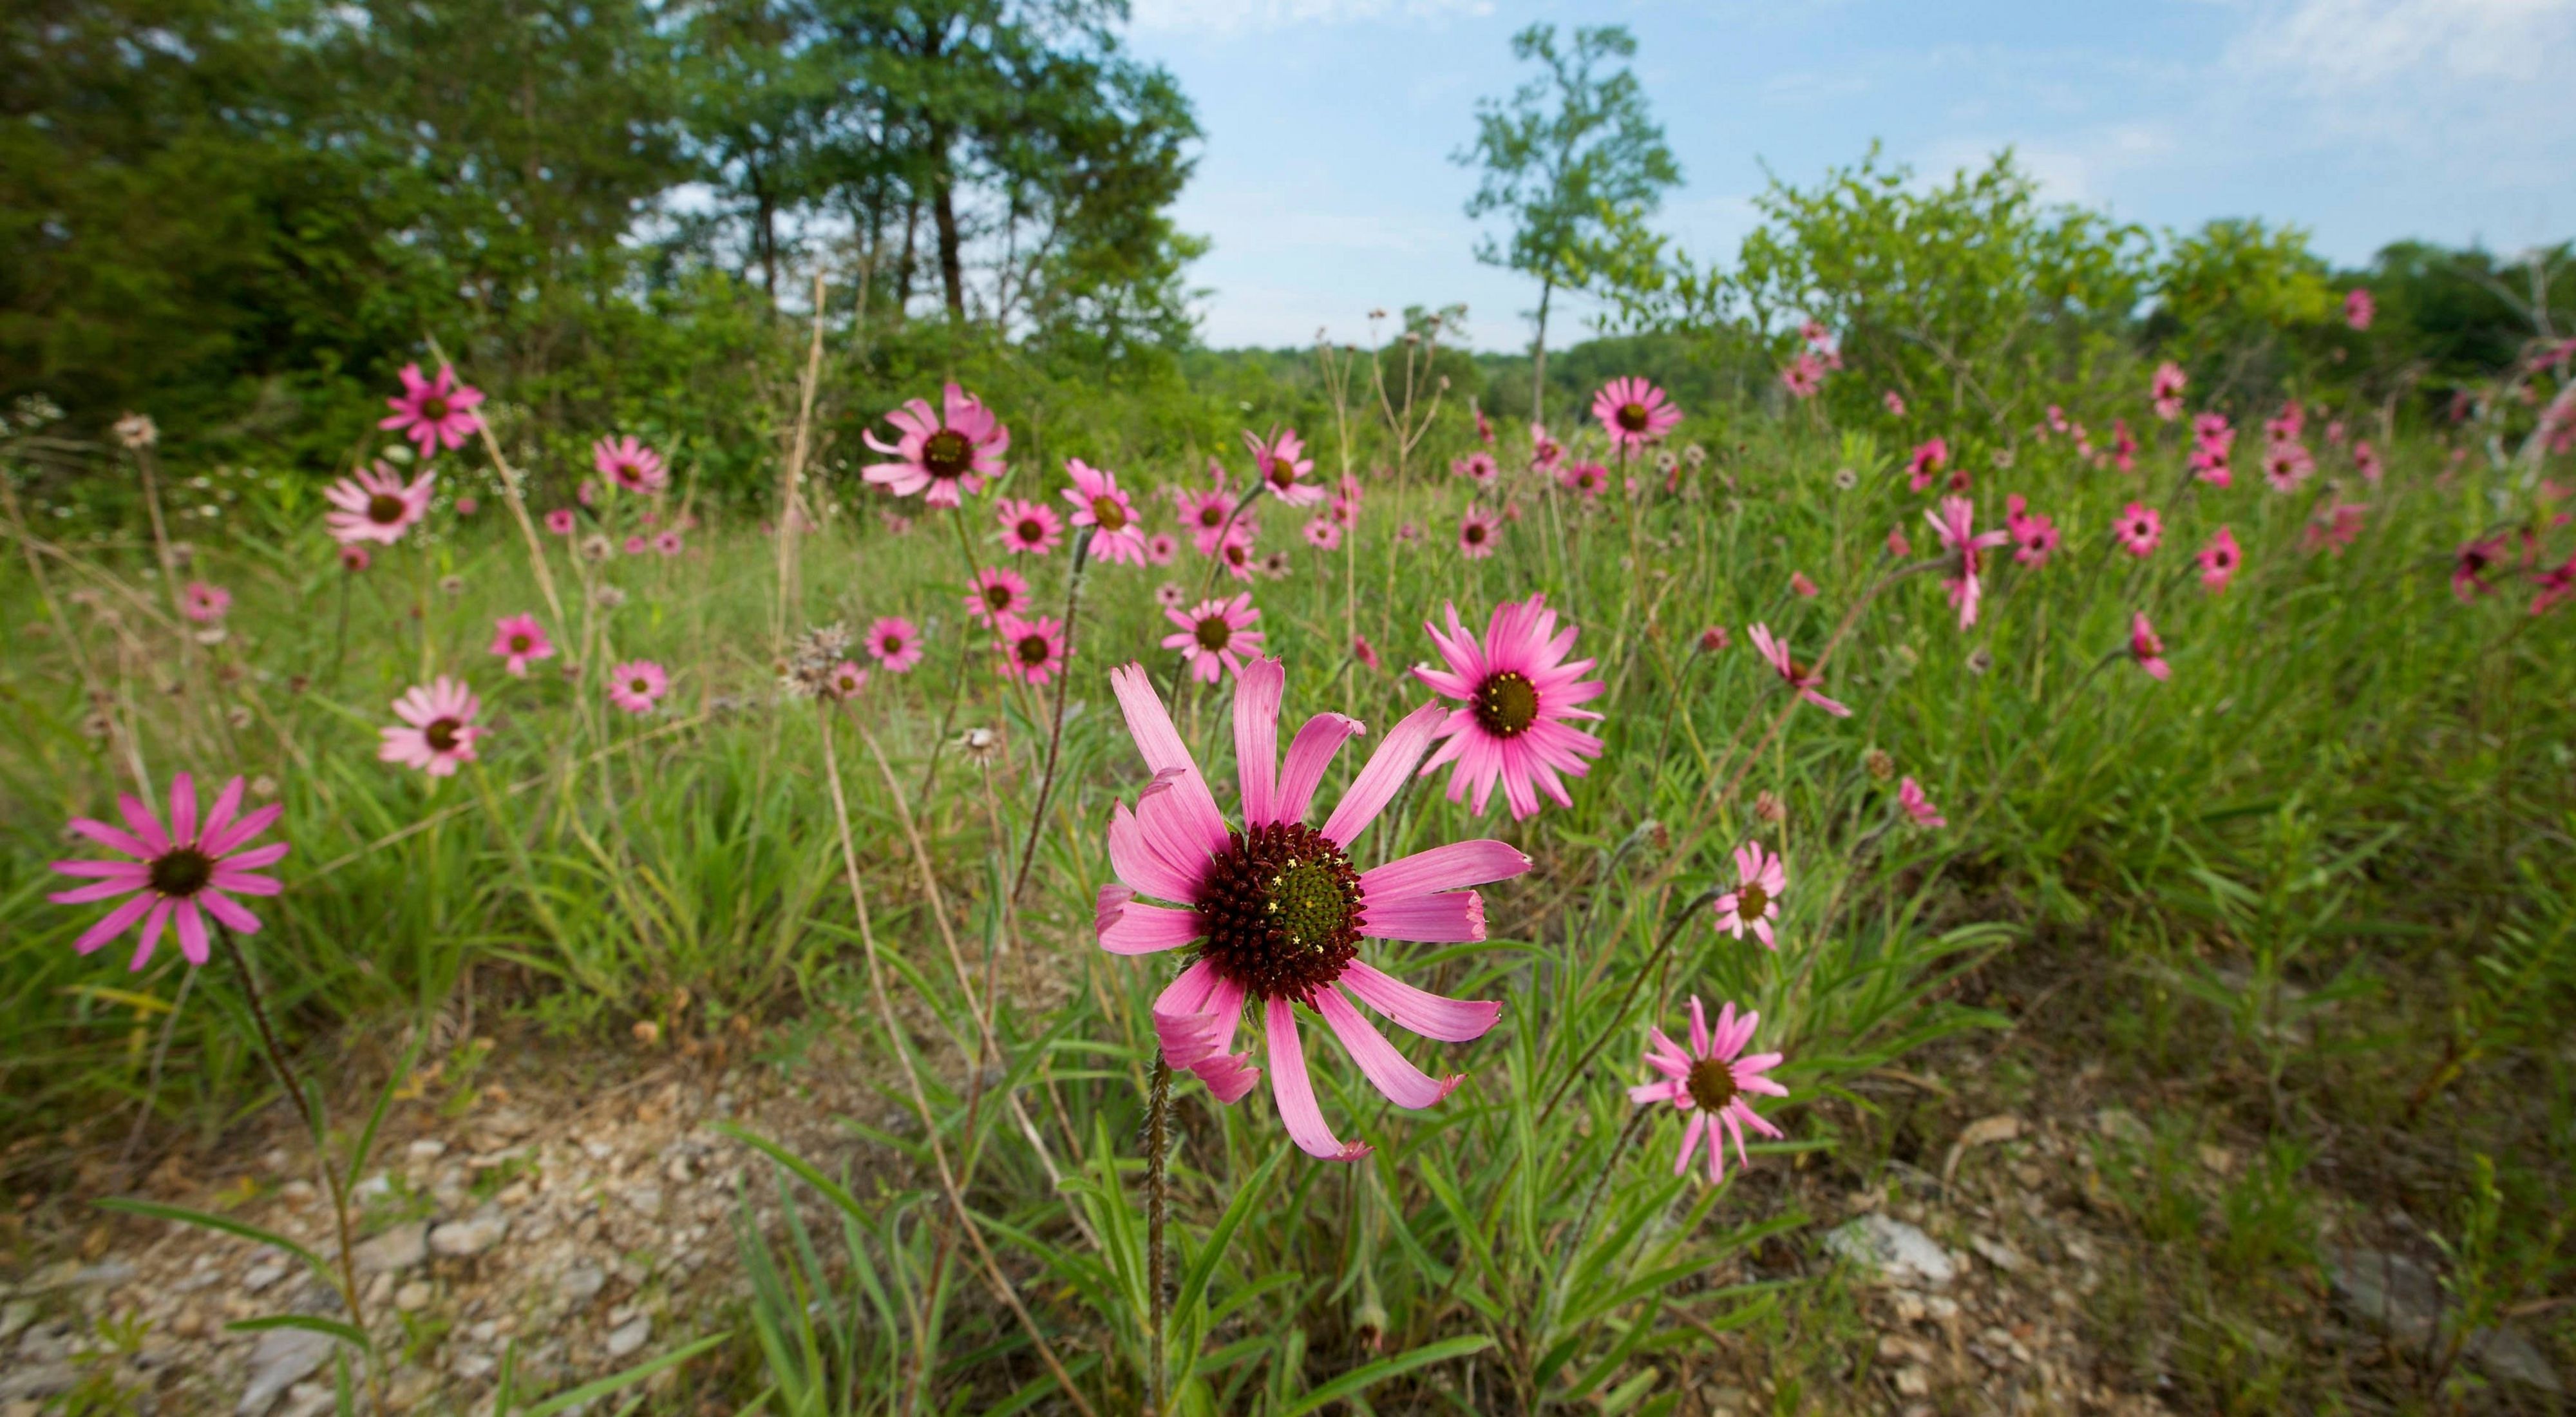 Tennessee coneflowers, flowers with thin bright-pink petals, bloom at Couchville Cedar Glade State Natural Area.